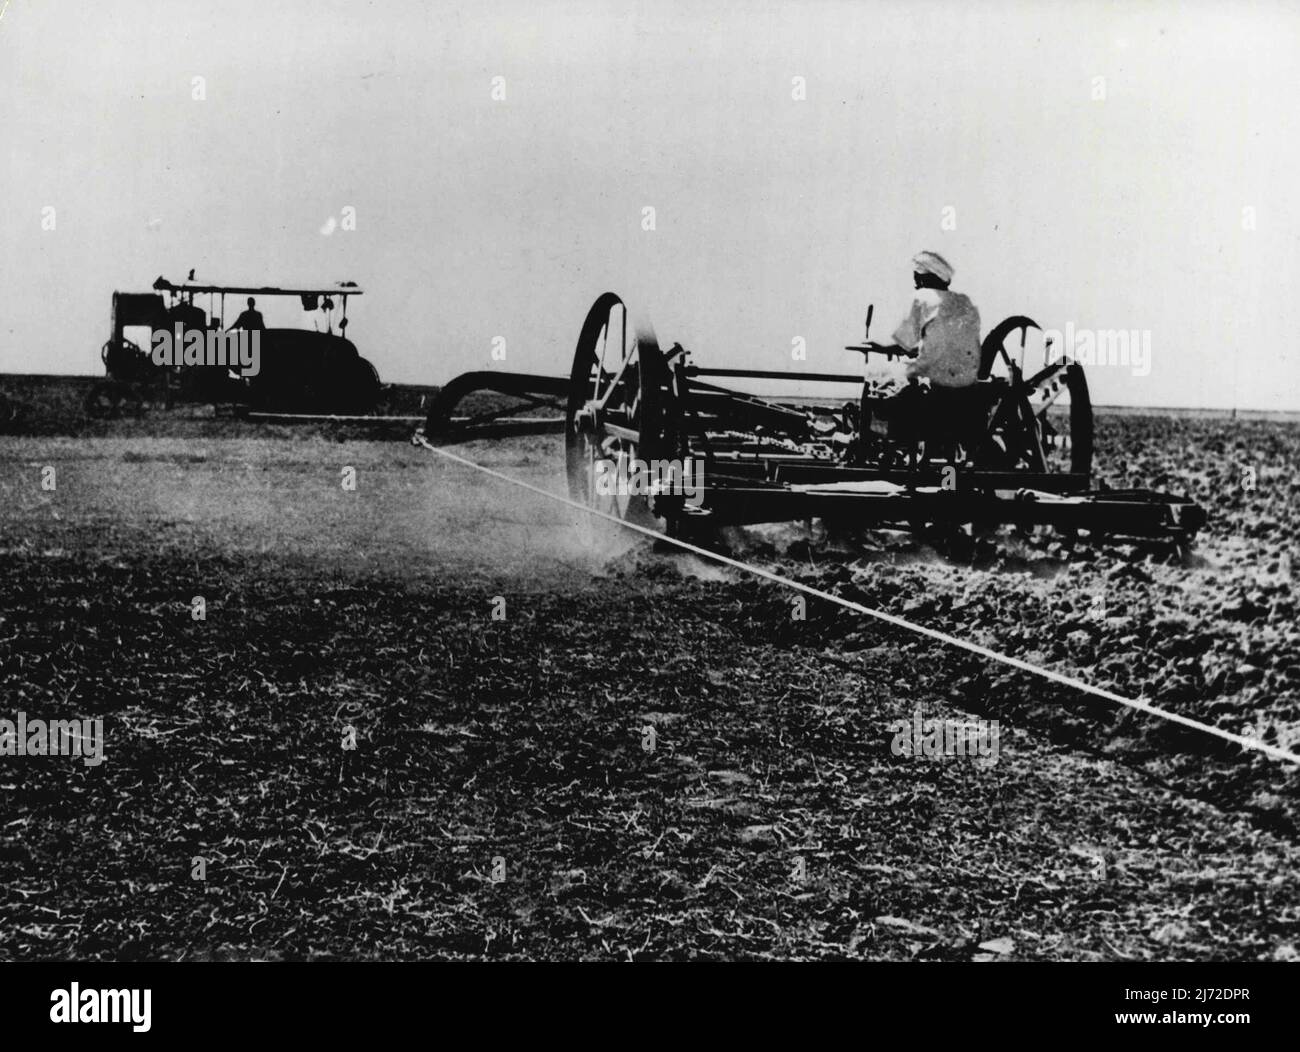 Deal On The Nile. The Gezira Cotton Scheme -- Large scale ploughing of more difficult soil is done by big ***** ploughs Engines stationed either end of huge fields draw plough back ***** and forwards on cables between them. This method is found more economical ***** efficient than use of tractors. Machines are from pool maintained by cotton company. British Government in Africa has long had its own 'Tennessee Valley' scheme - Gezira Cotton Scheme in the valley area of nearly a million acres between the ***** and white Niles. Plans for the area's development were begun before tee last ***** and Stock Photo